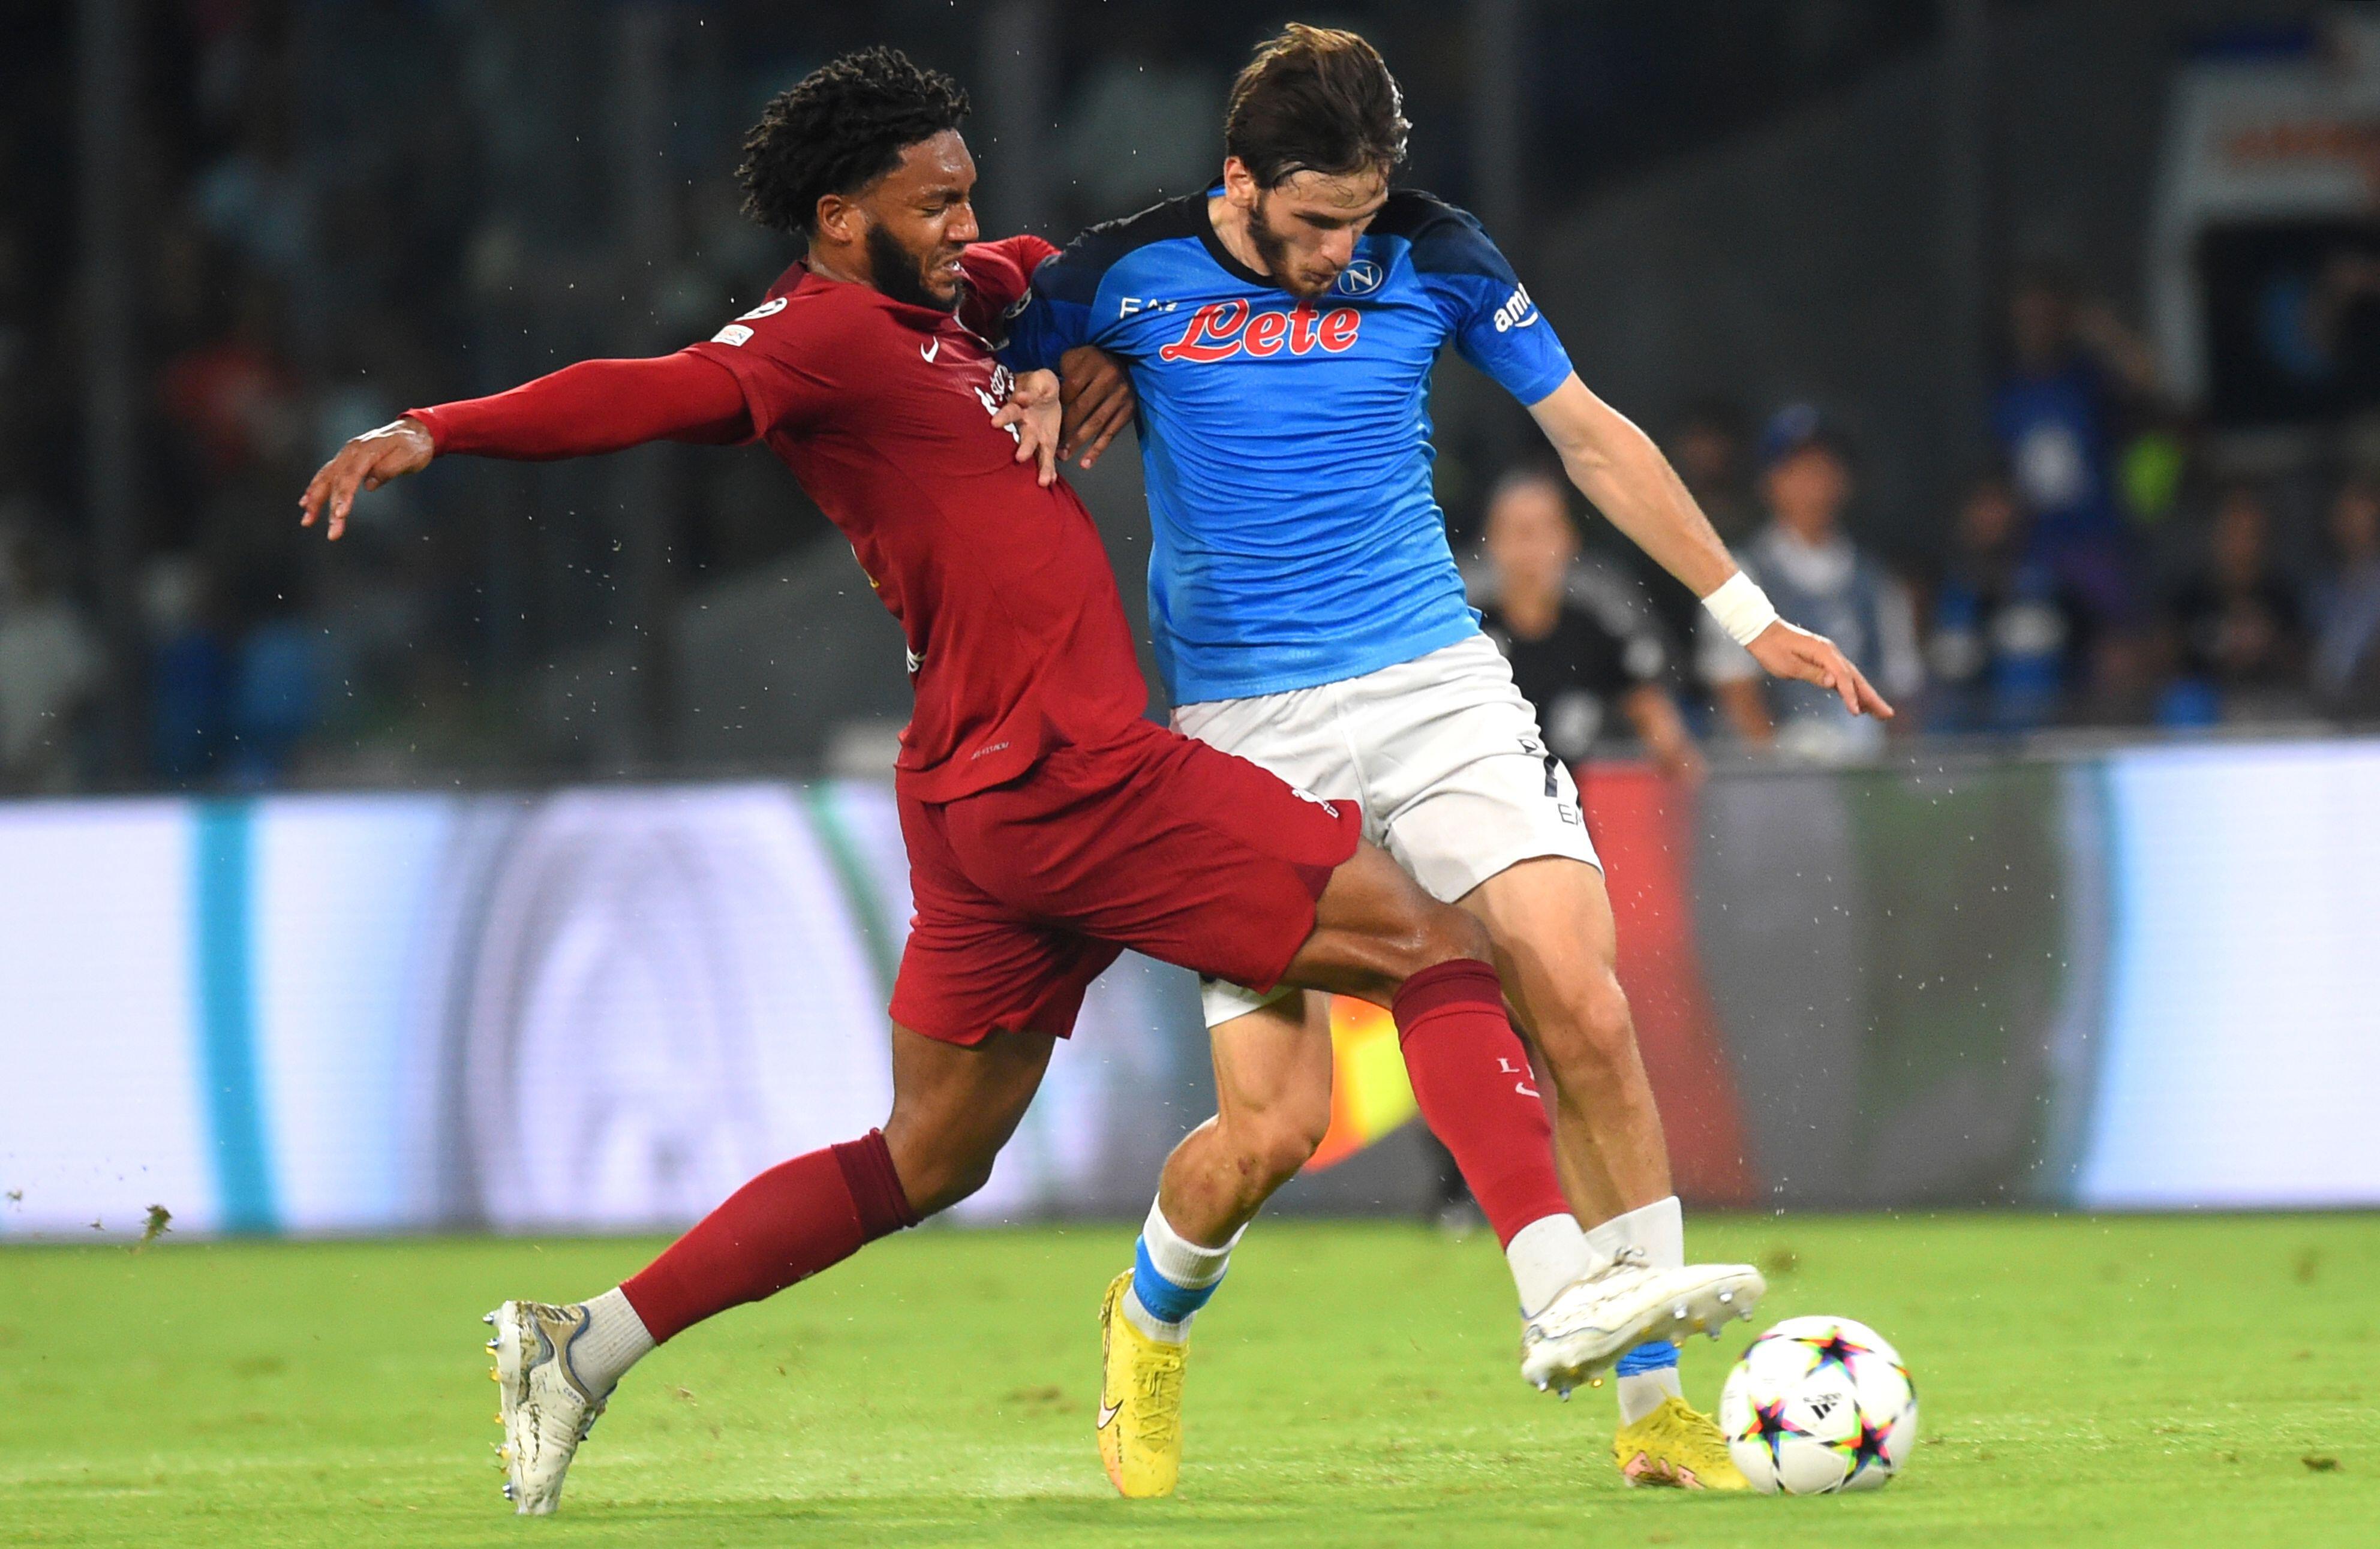 Liverpool set to sign Napoli winger as Klopp prepares list for January transfer